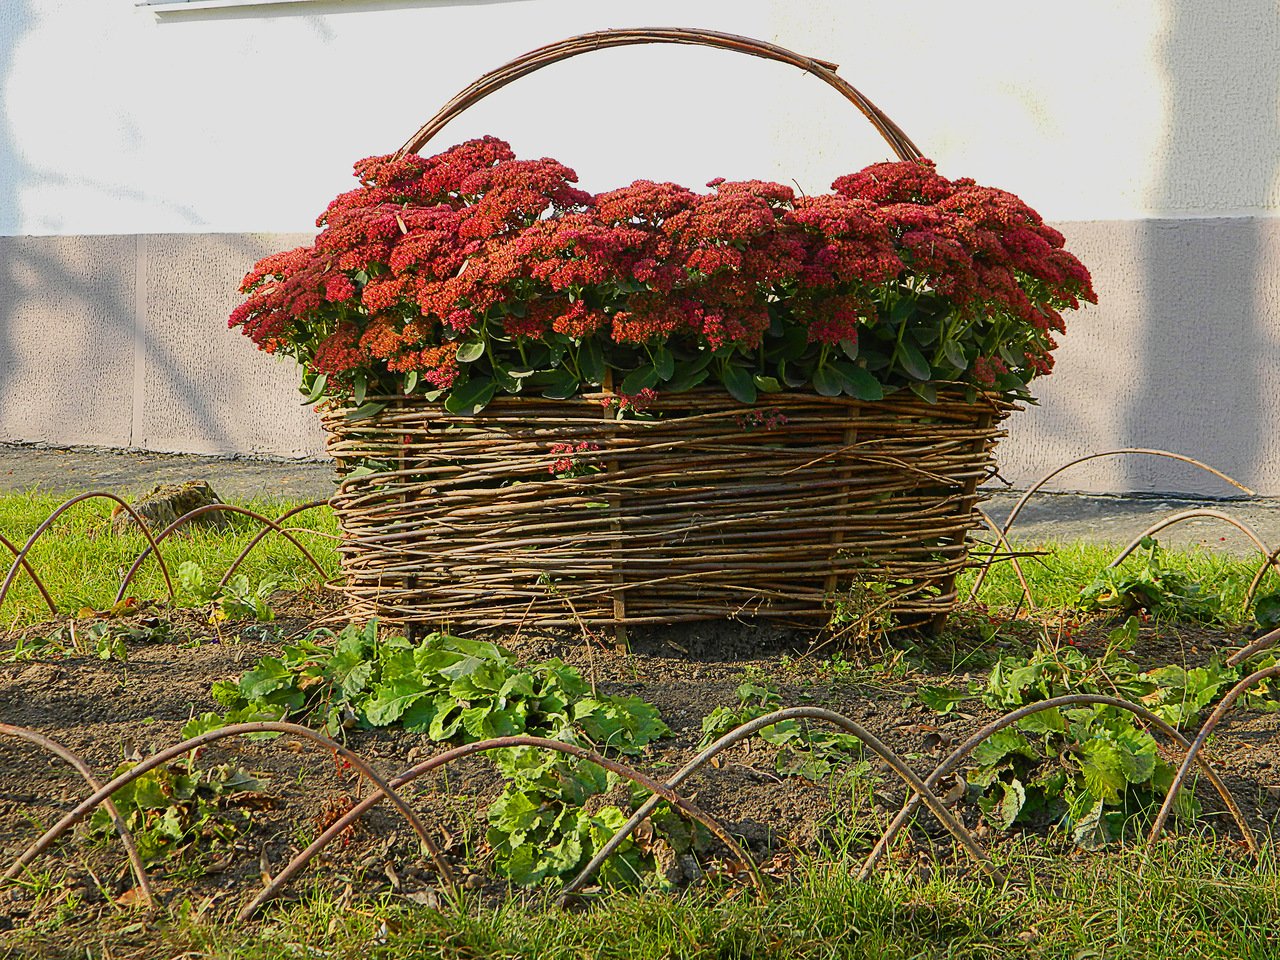 flowerbed in the basket with their hands | Клумбы, Цветник, Структура сада